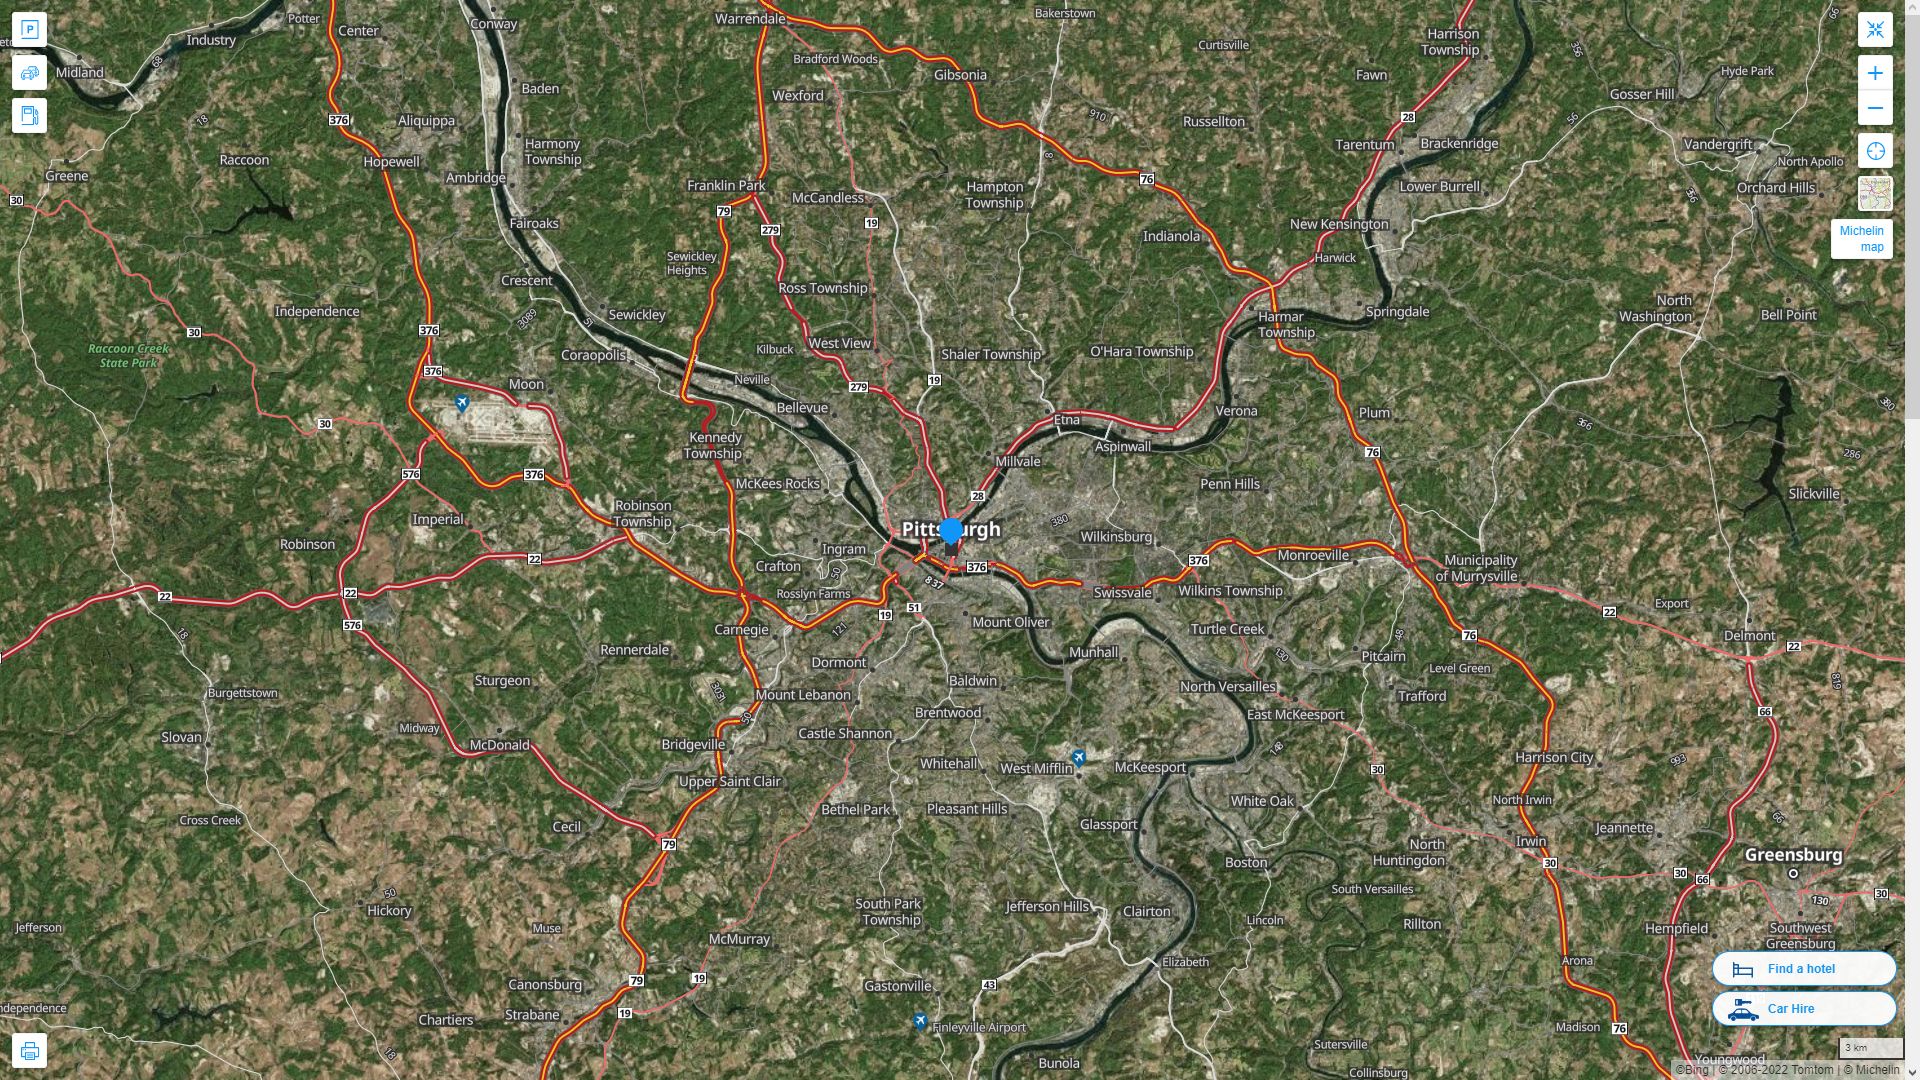 Pittsburgh Pennsylvania Highway and Road Map with Satellite View